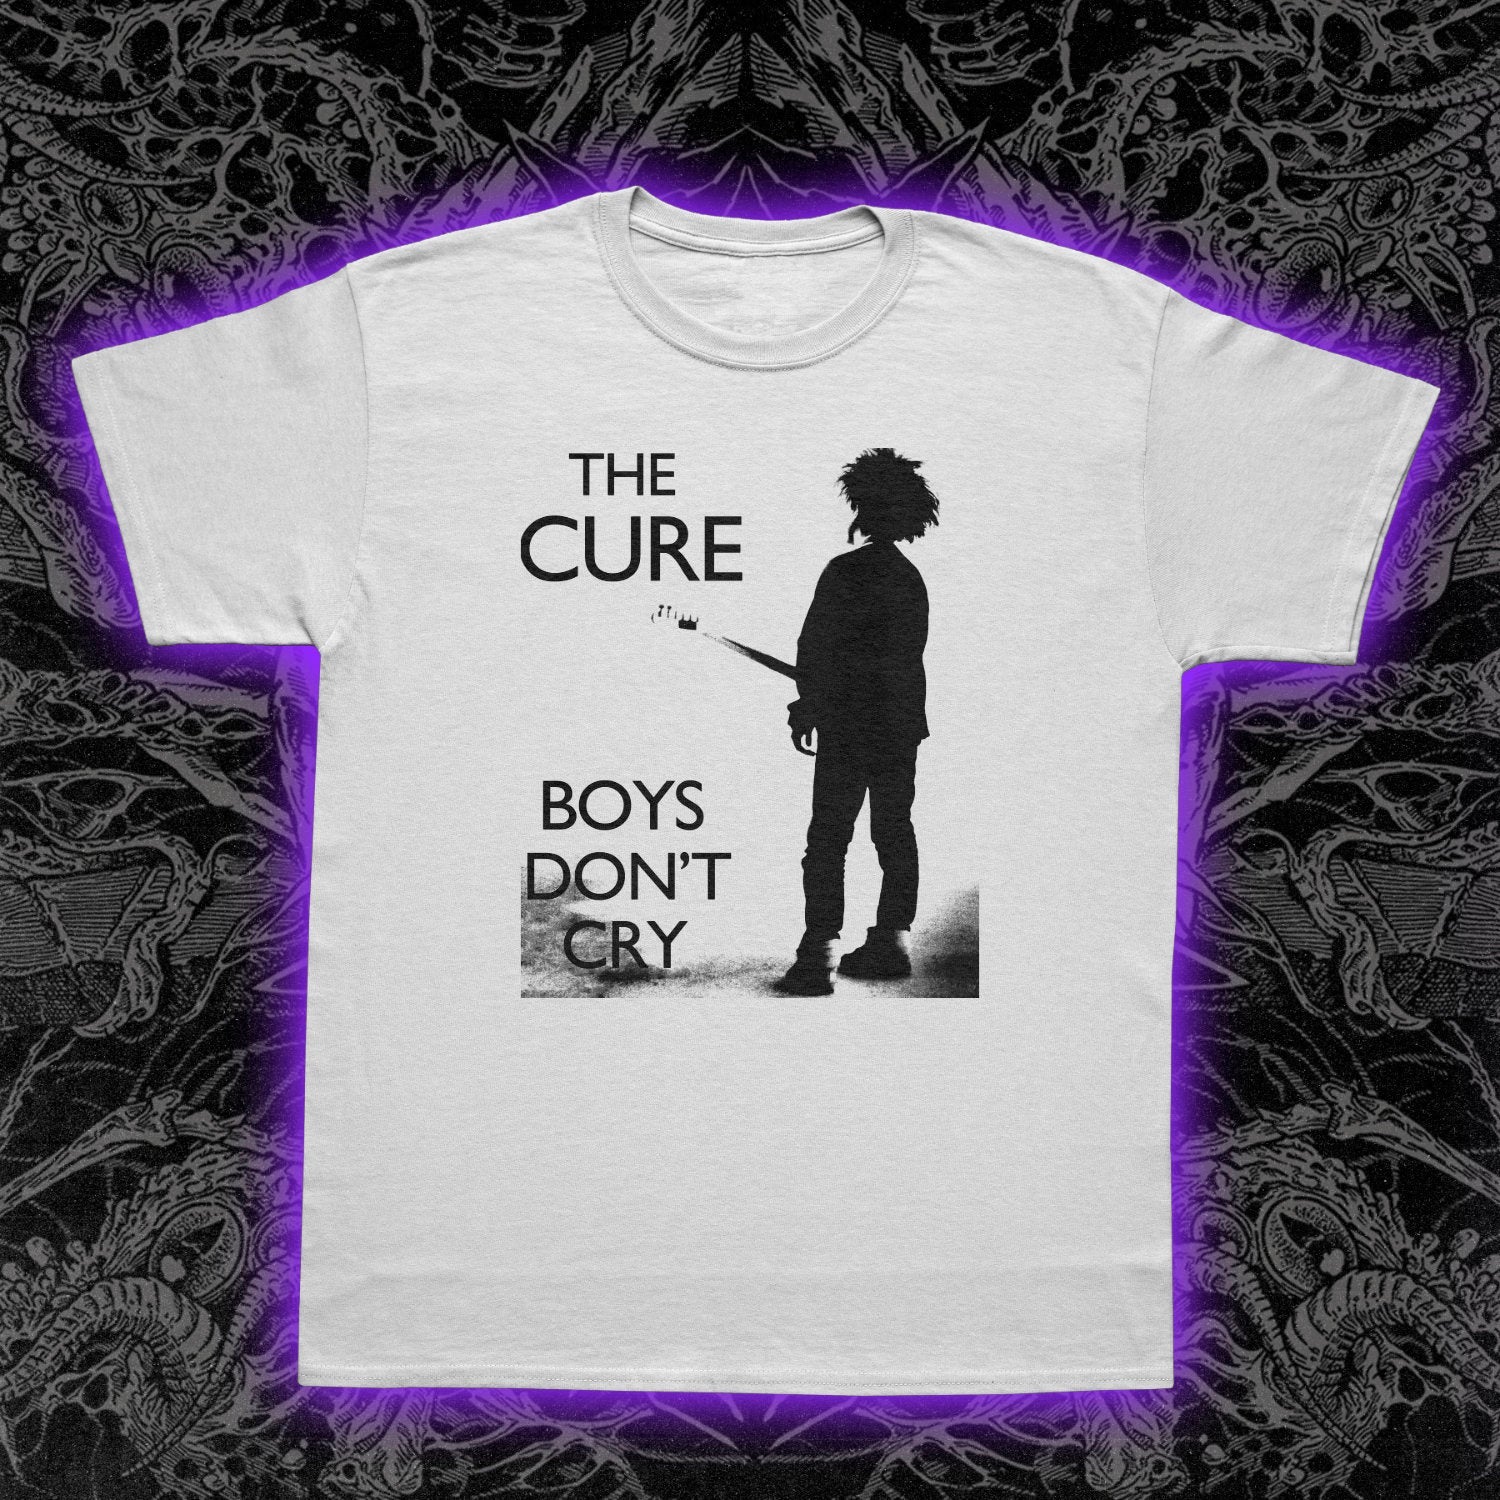 The Cure Boys Don't Cry Premium Tee